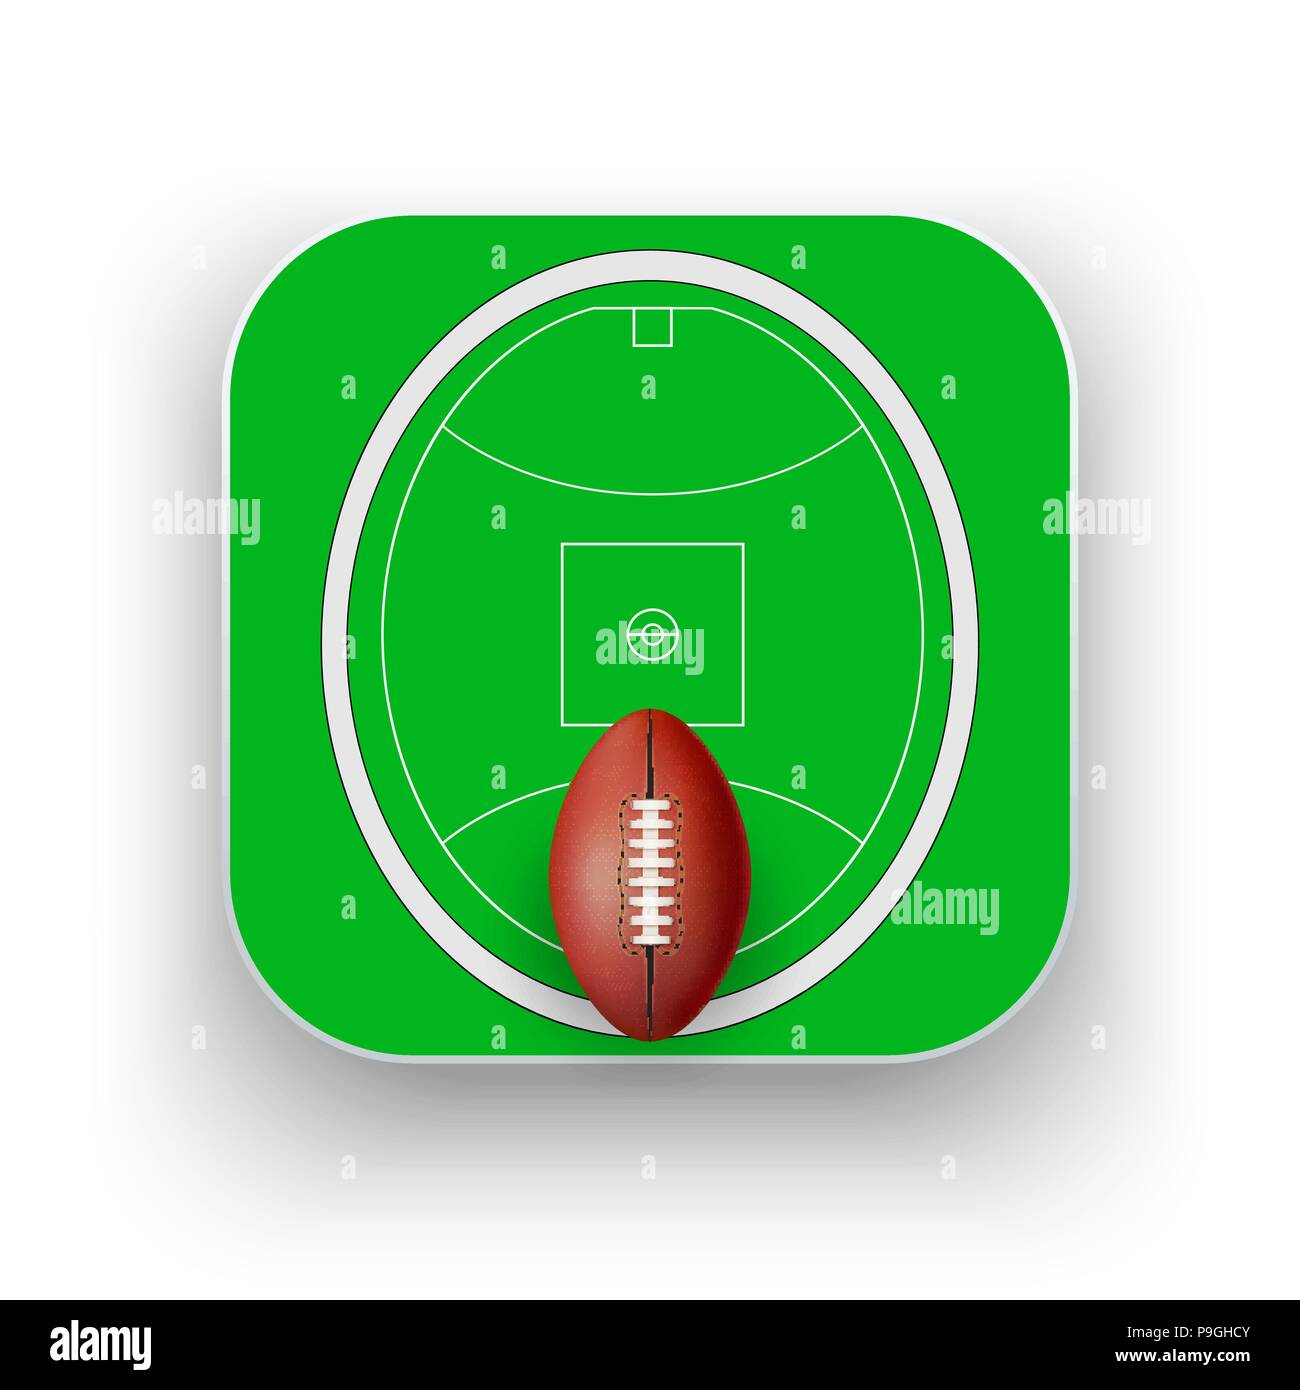 Square icon of Australian rules football sport Stock Vector